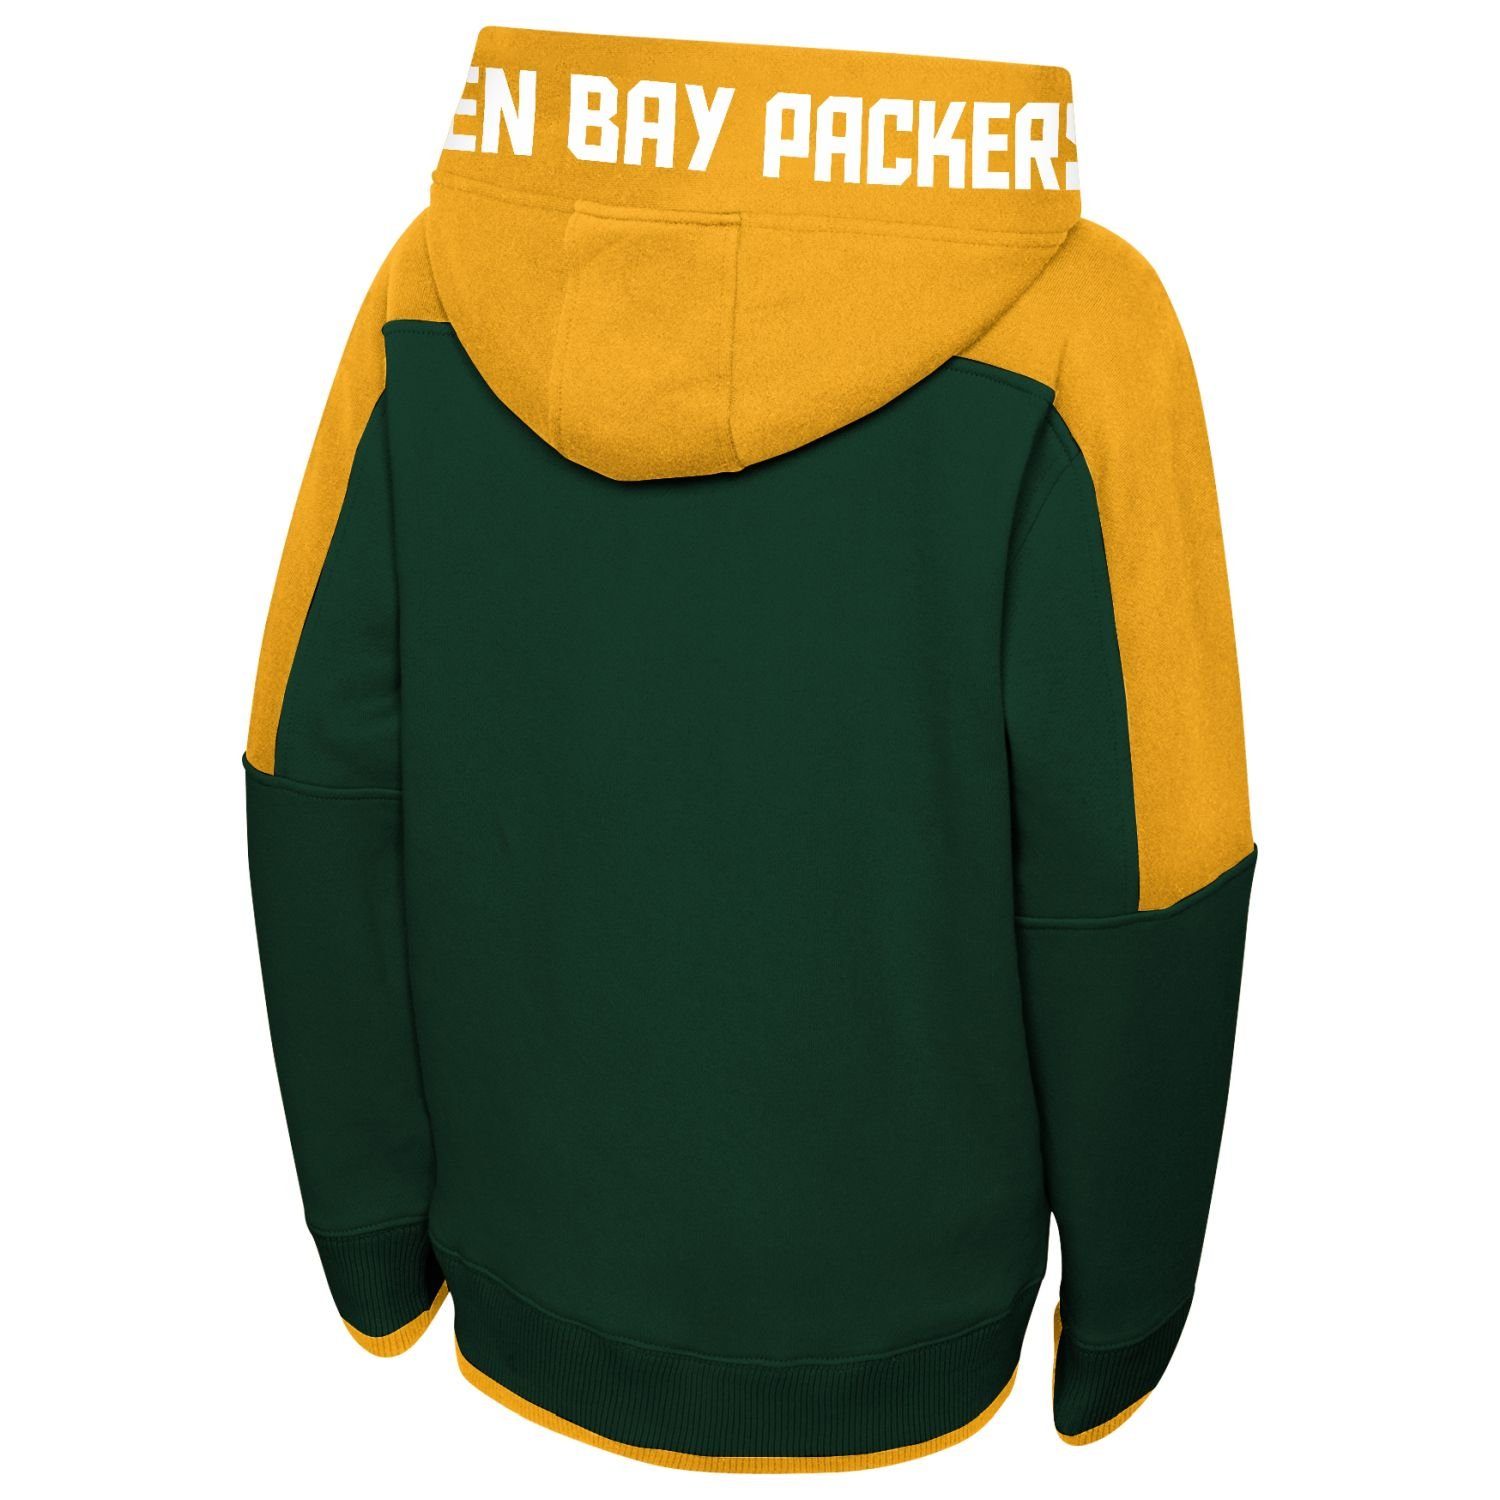 Packers Green Outerstuff Bay Kapuzenpullover UP NFL POST